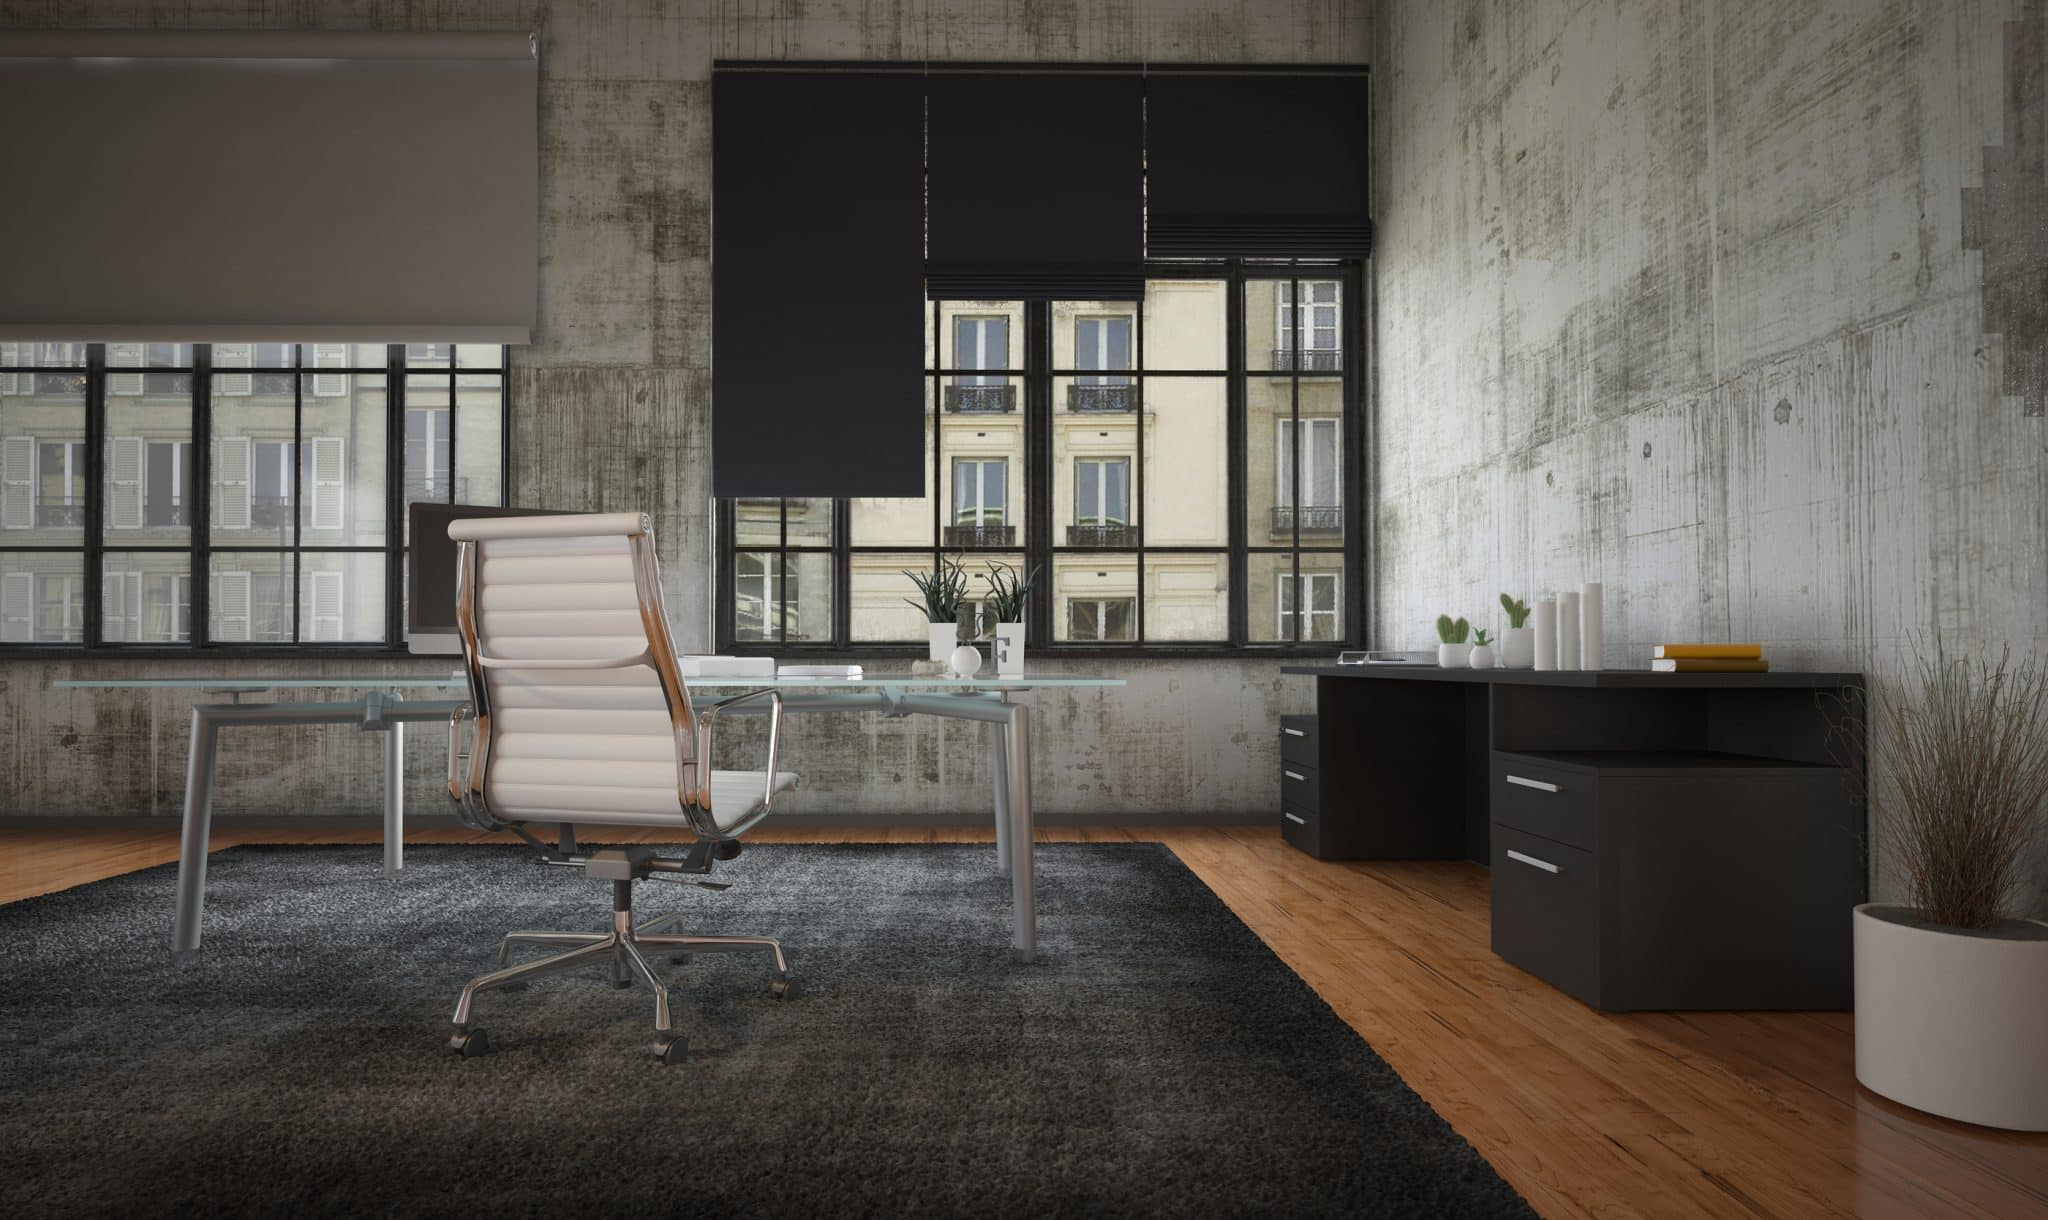 3D Rendering of Stark modern office interior with grey walls, minimalist furnishing and large feature windows with blinds overlooking a commercial urban building